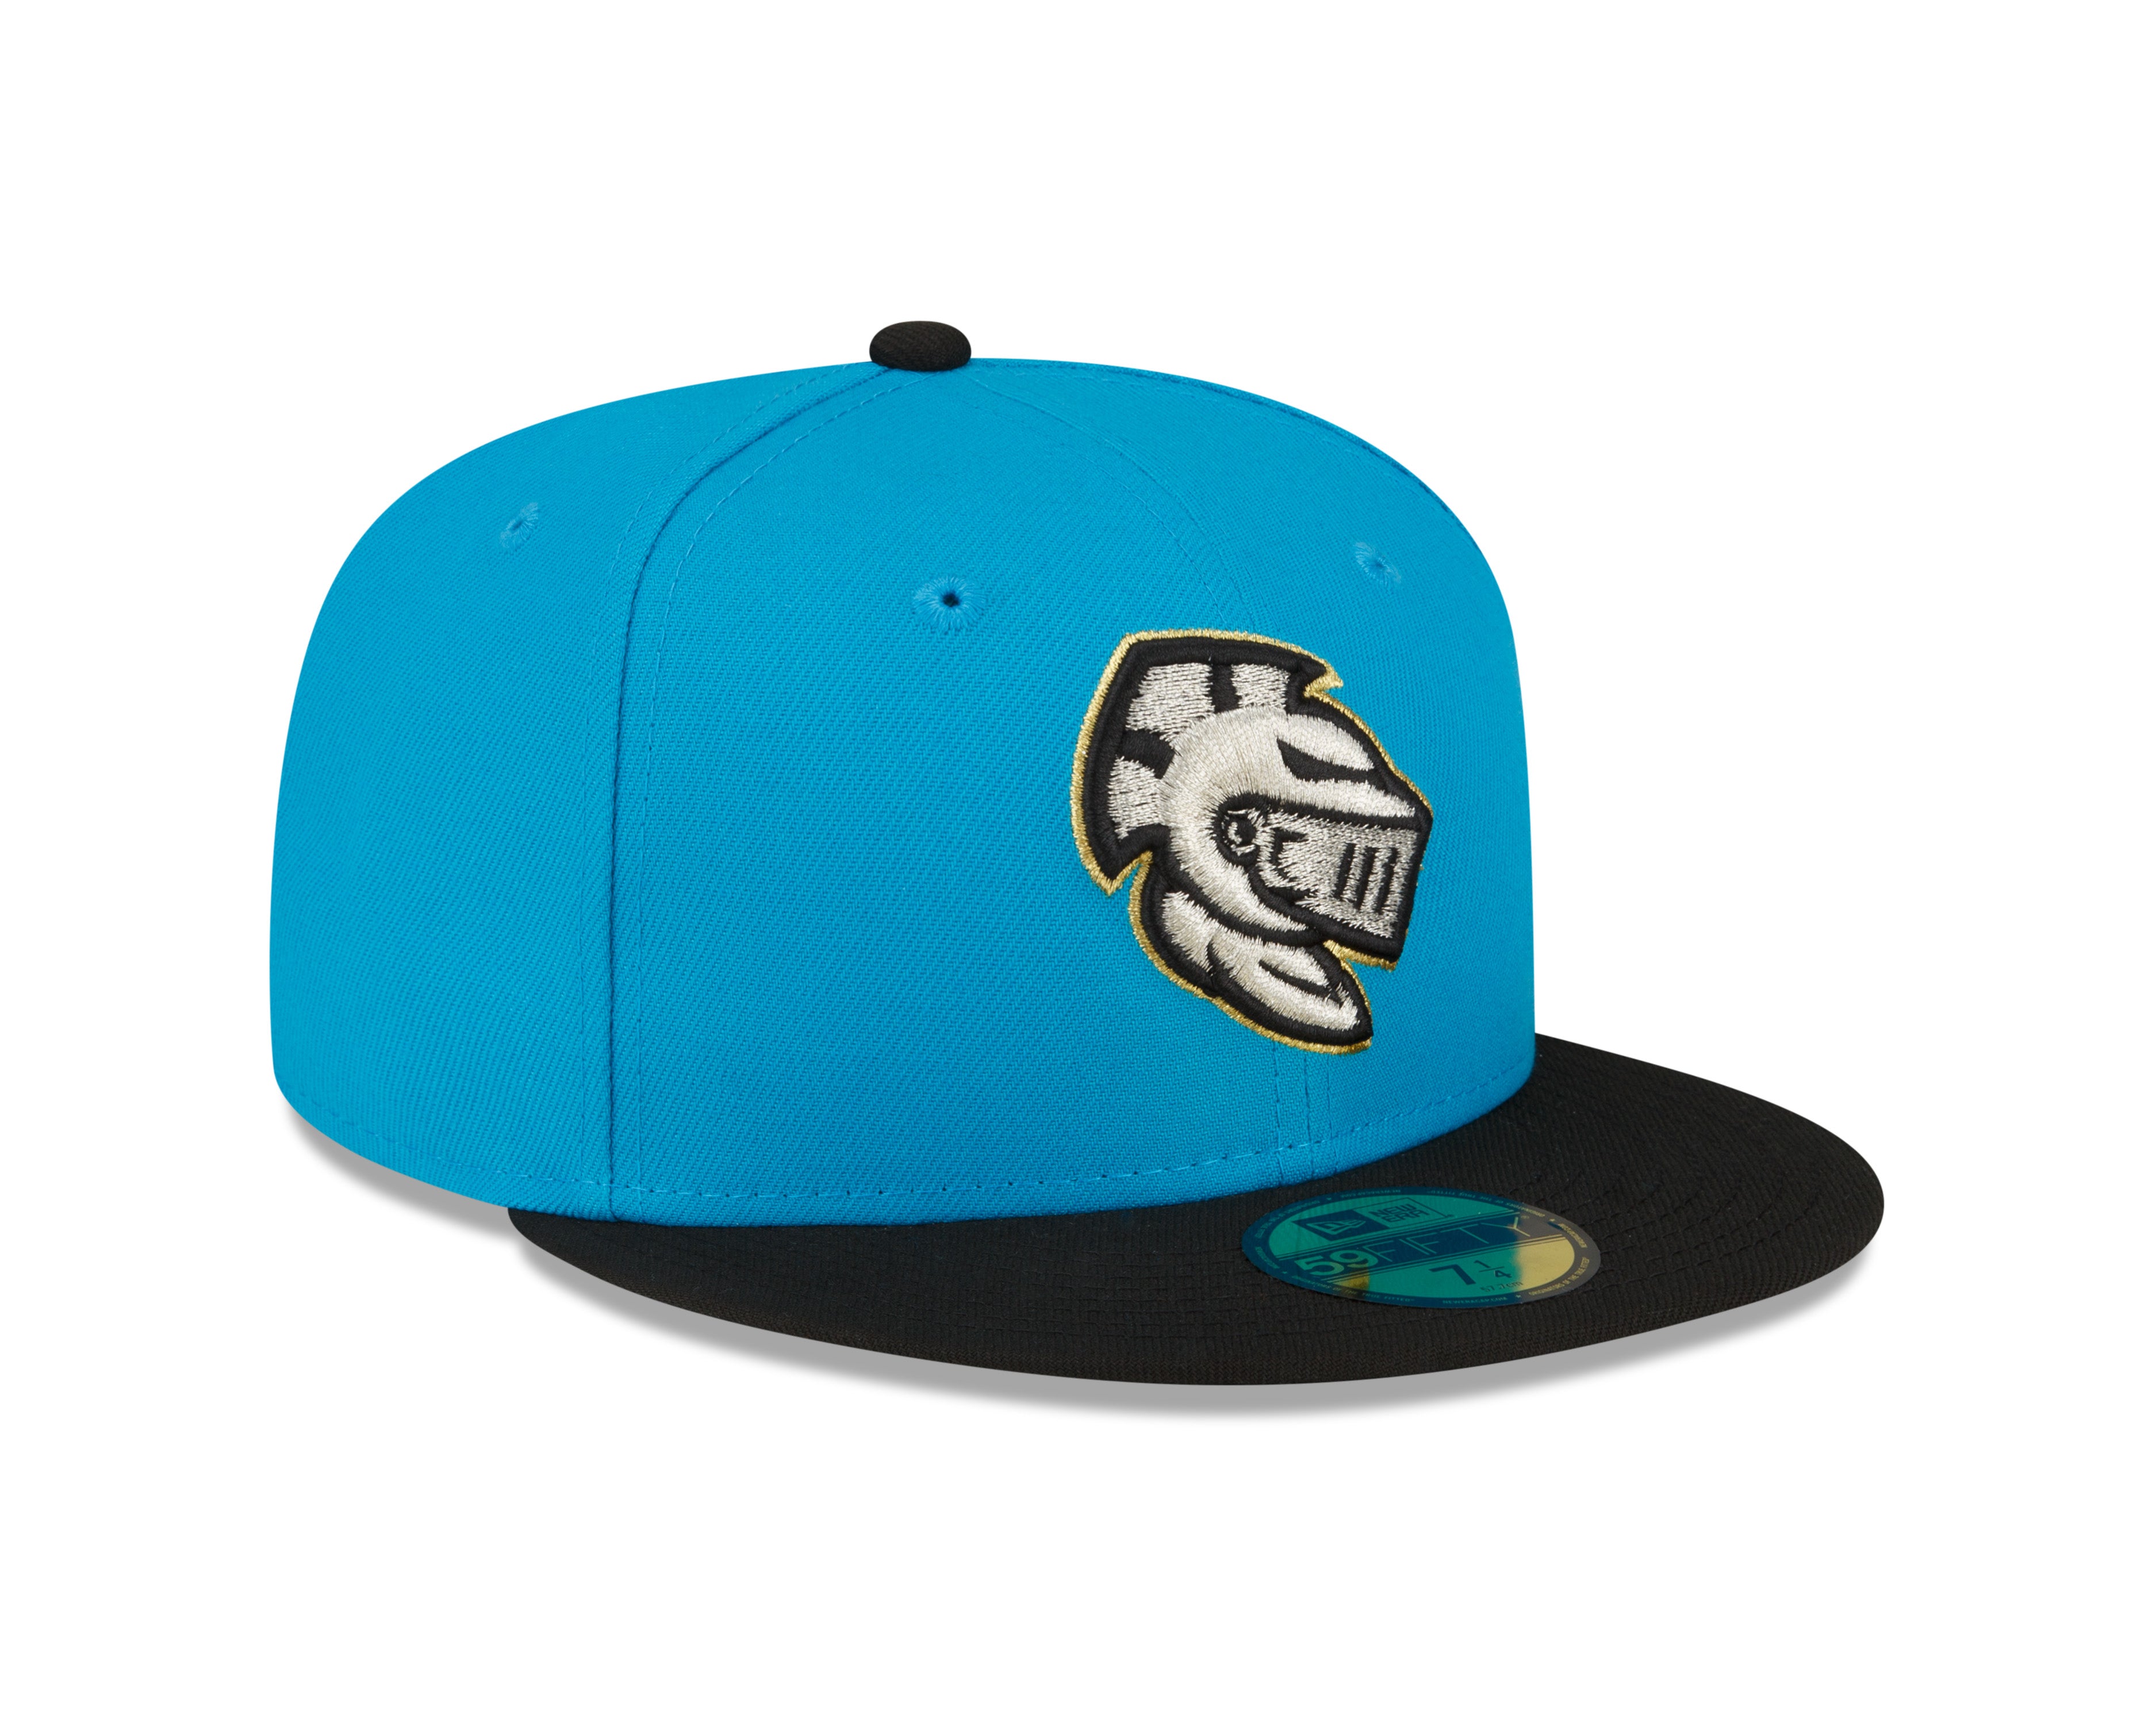 Official Charlotte Knights Hats, Knights Cap, Knights Hats